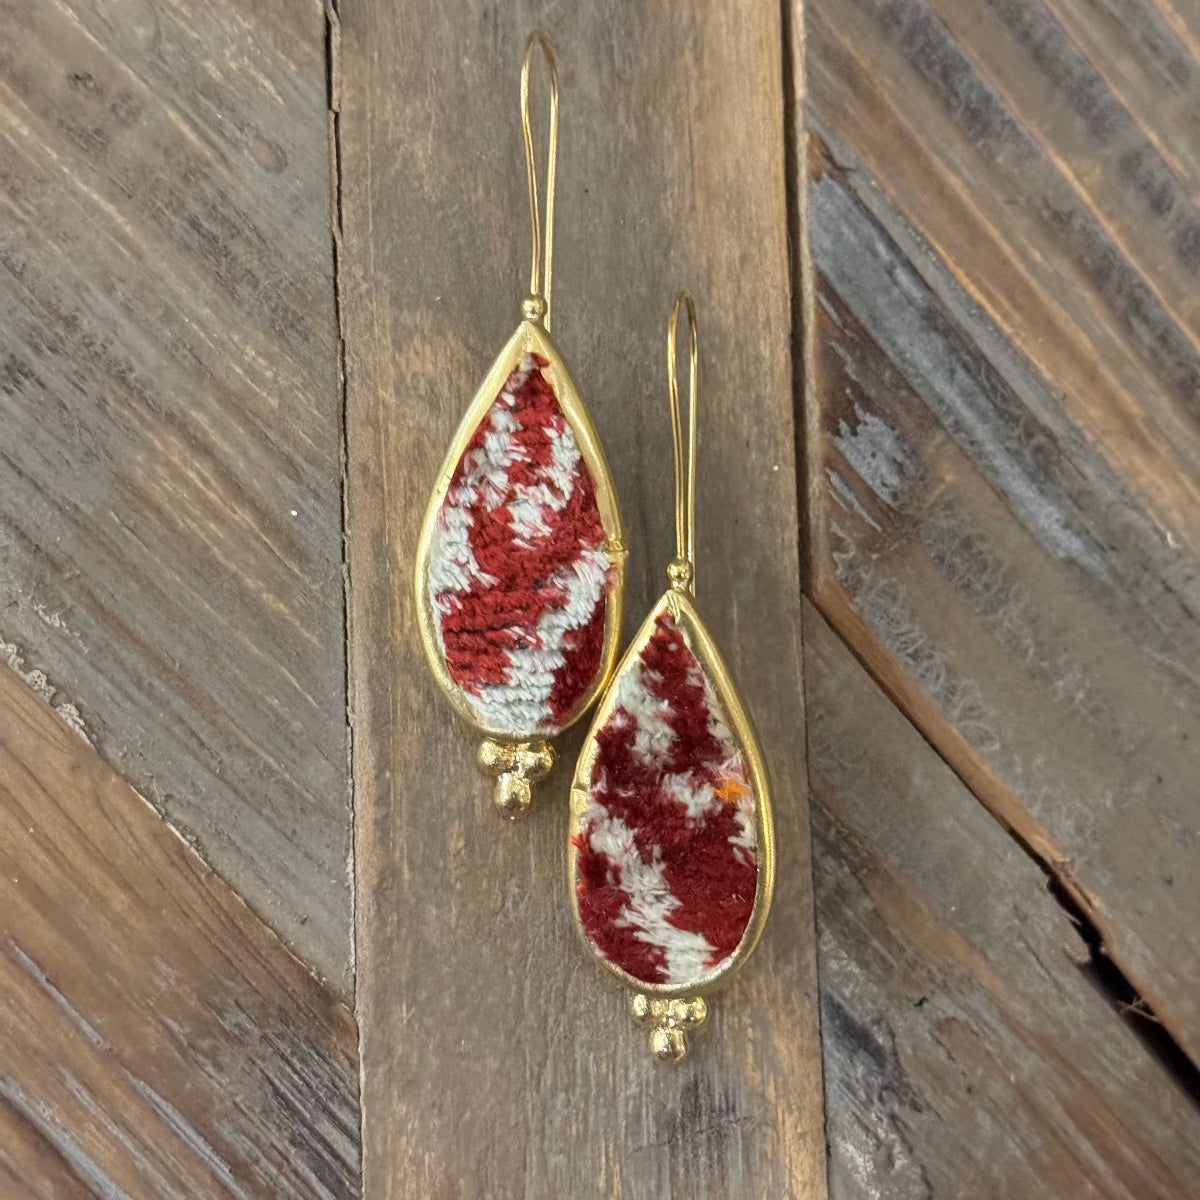 Hand Crafted Ottoman Vintage Textile Earrings - Pear New Jewelry Eyup Gunduz D 